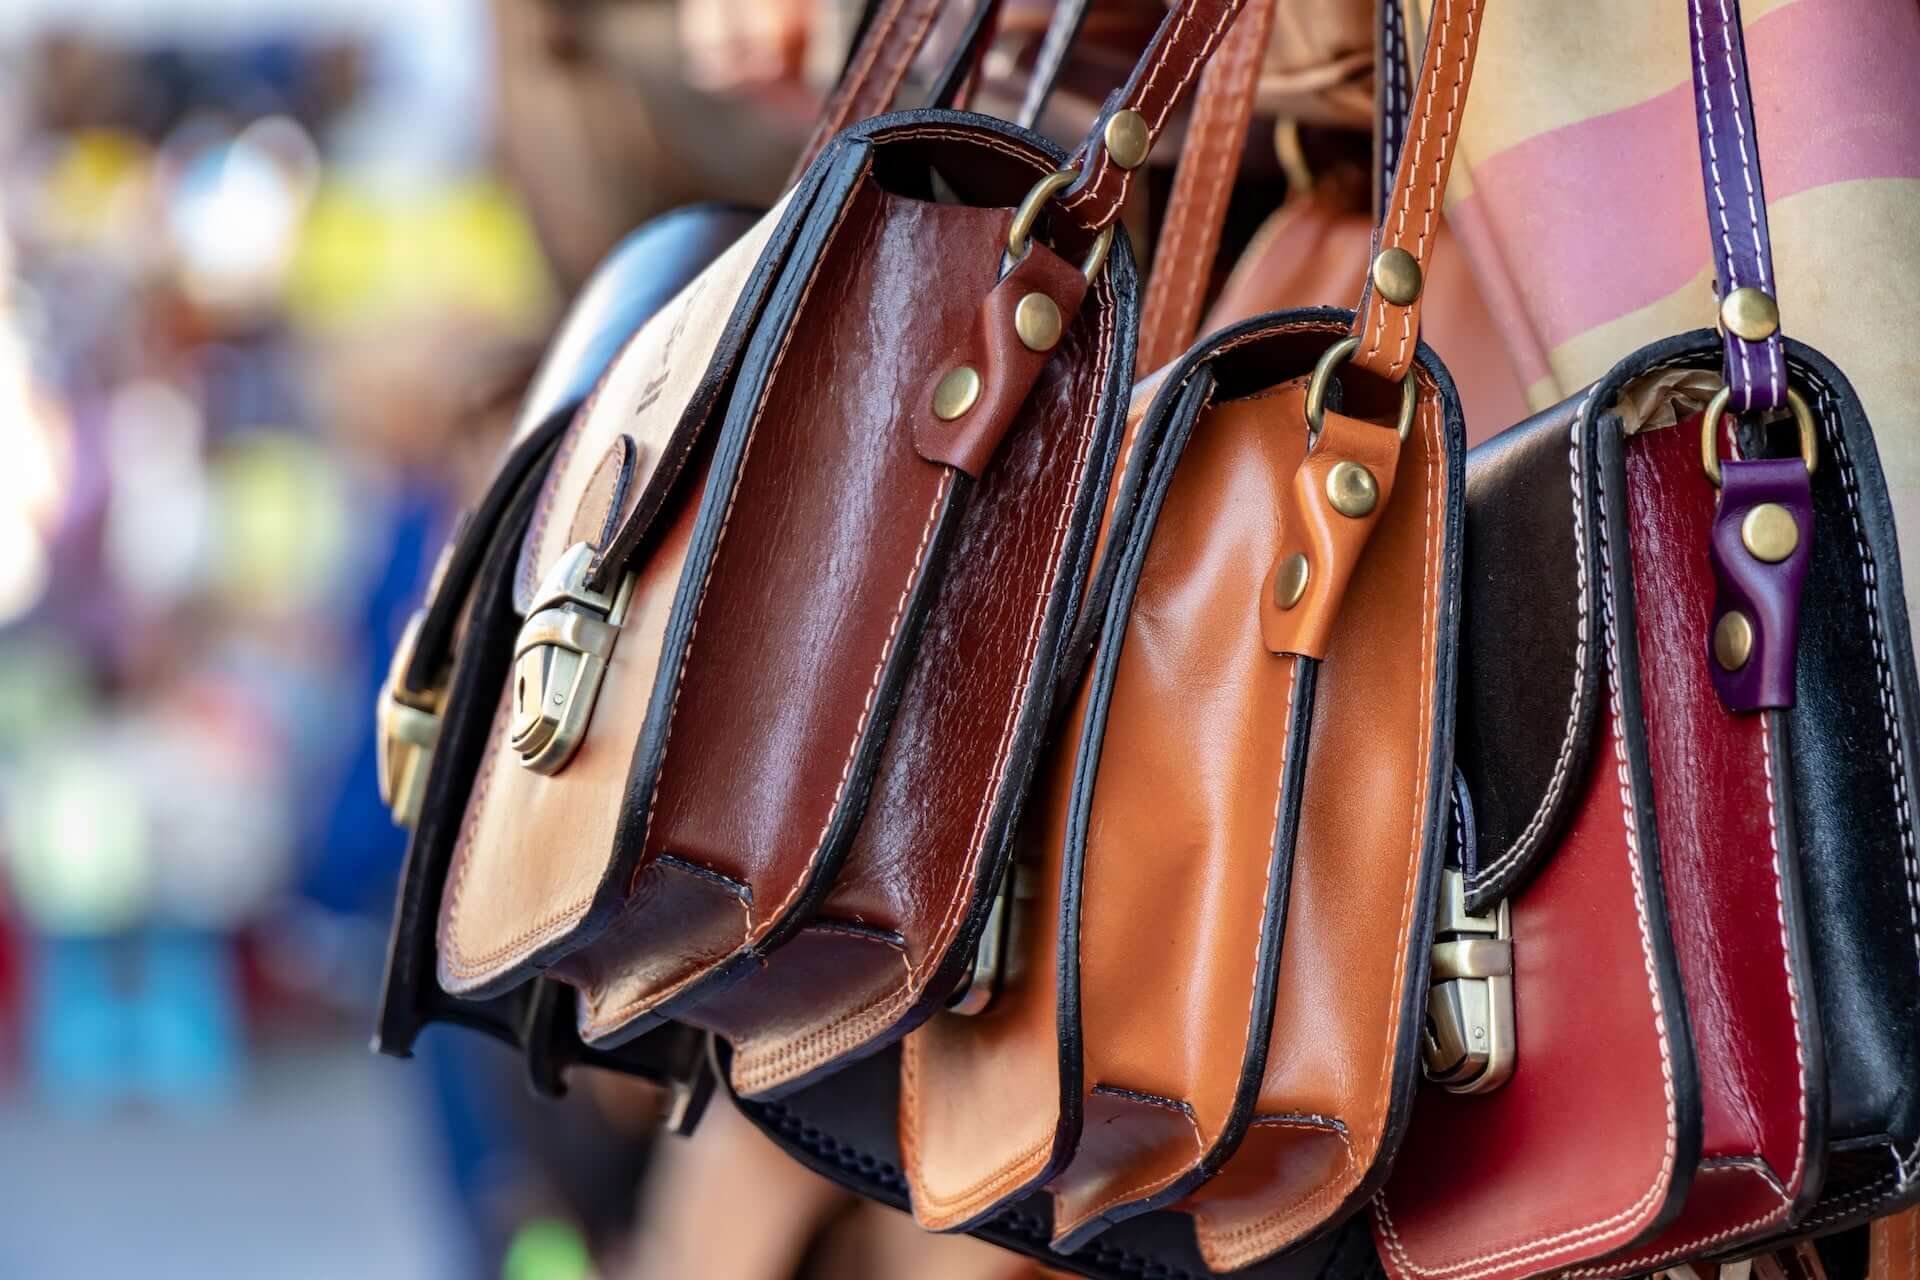 A stack of three leather handbags.